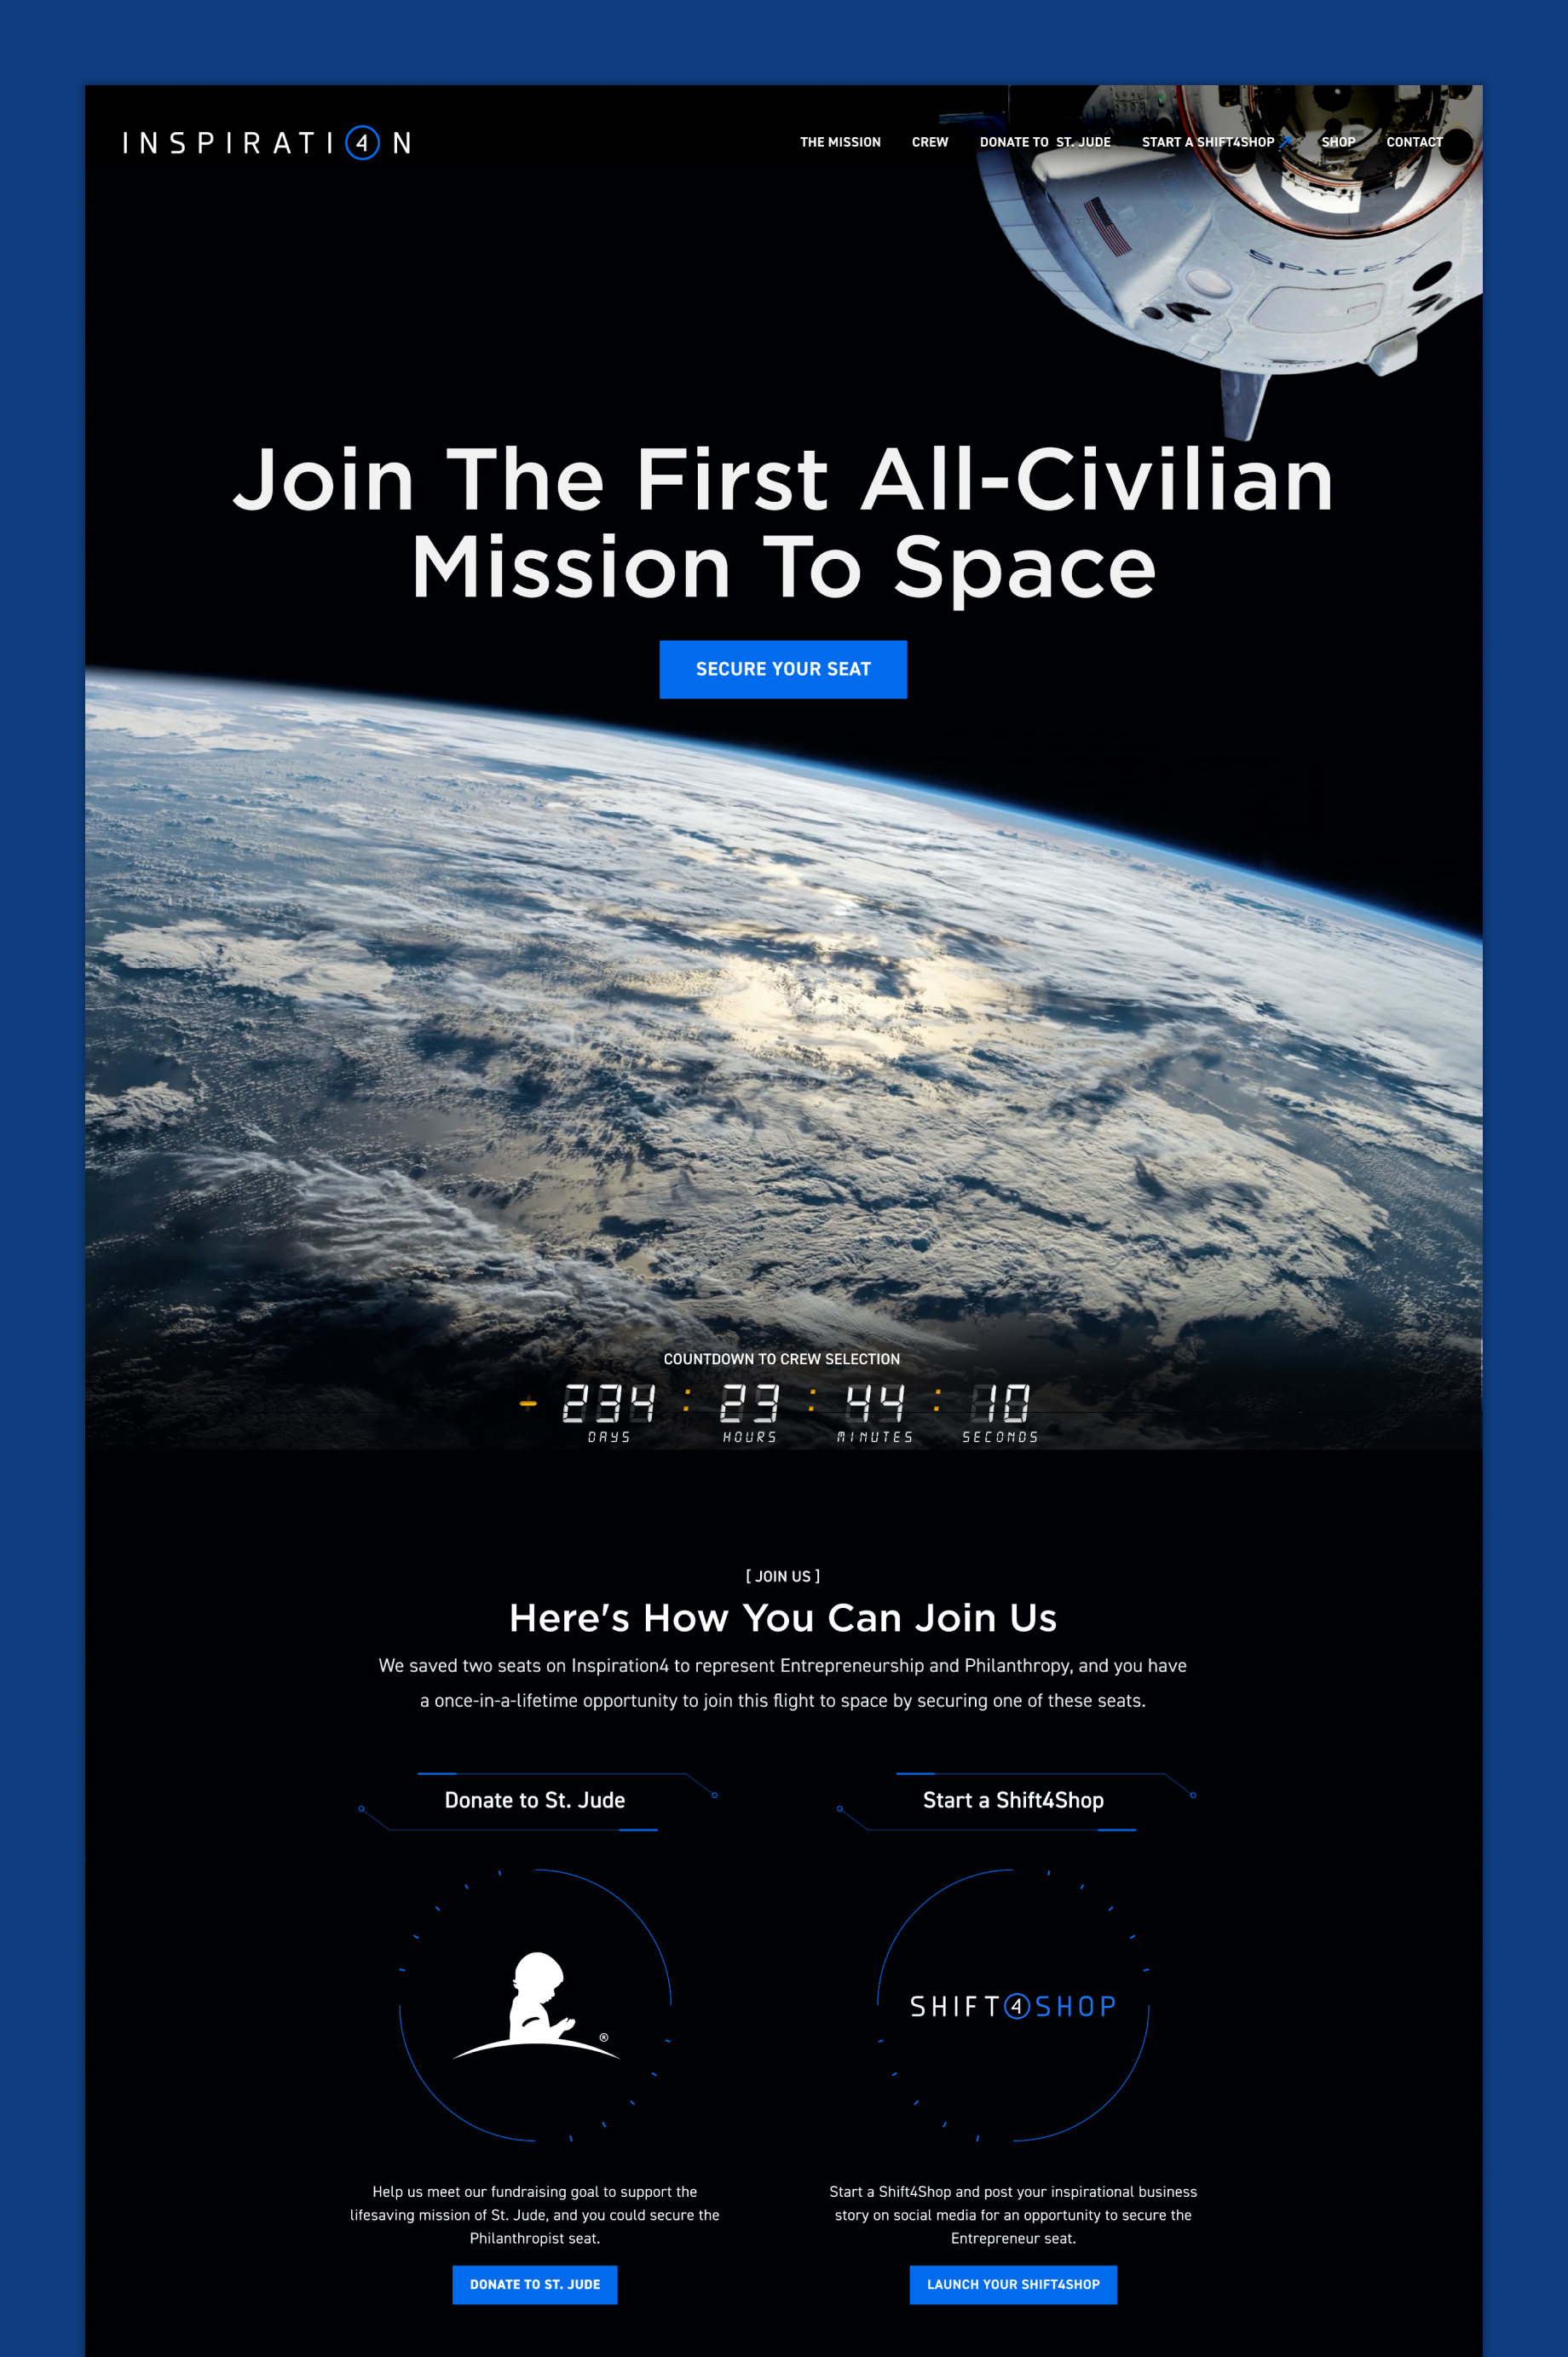 Screenshot of Inspiration4.com website with image of spacecraft in space above Earth